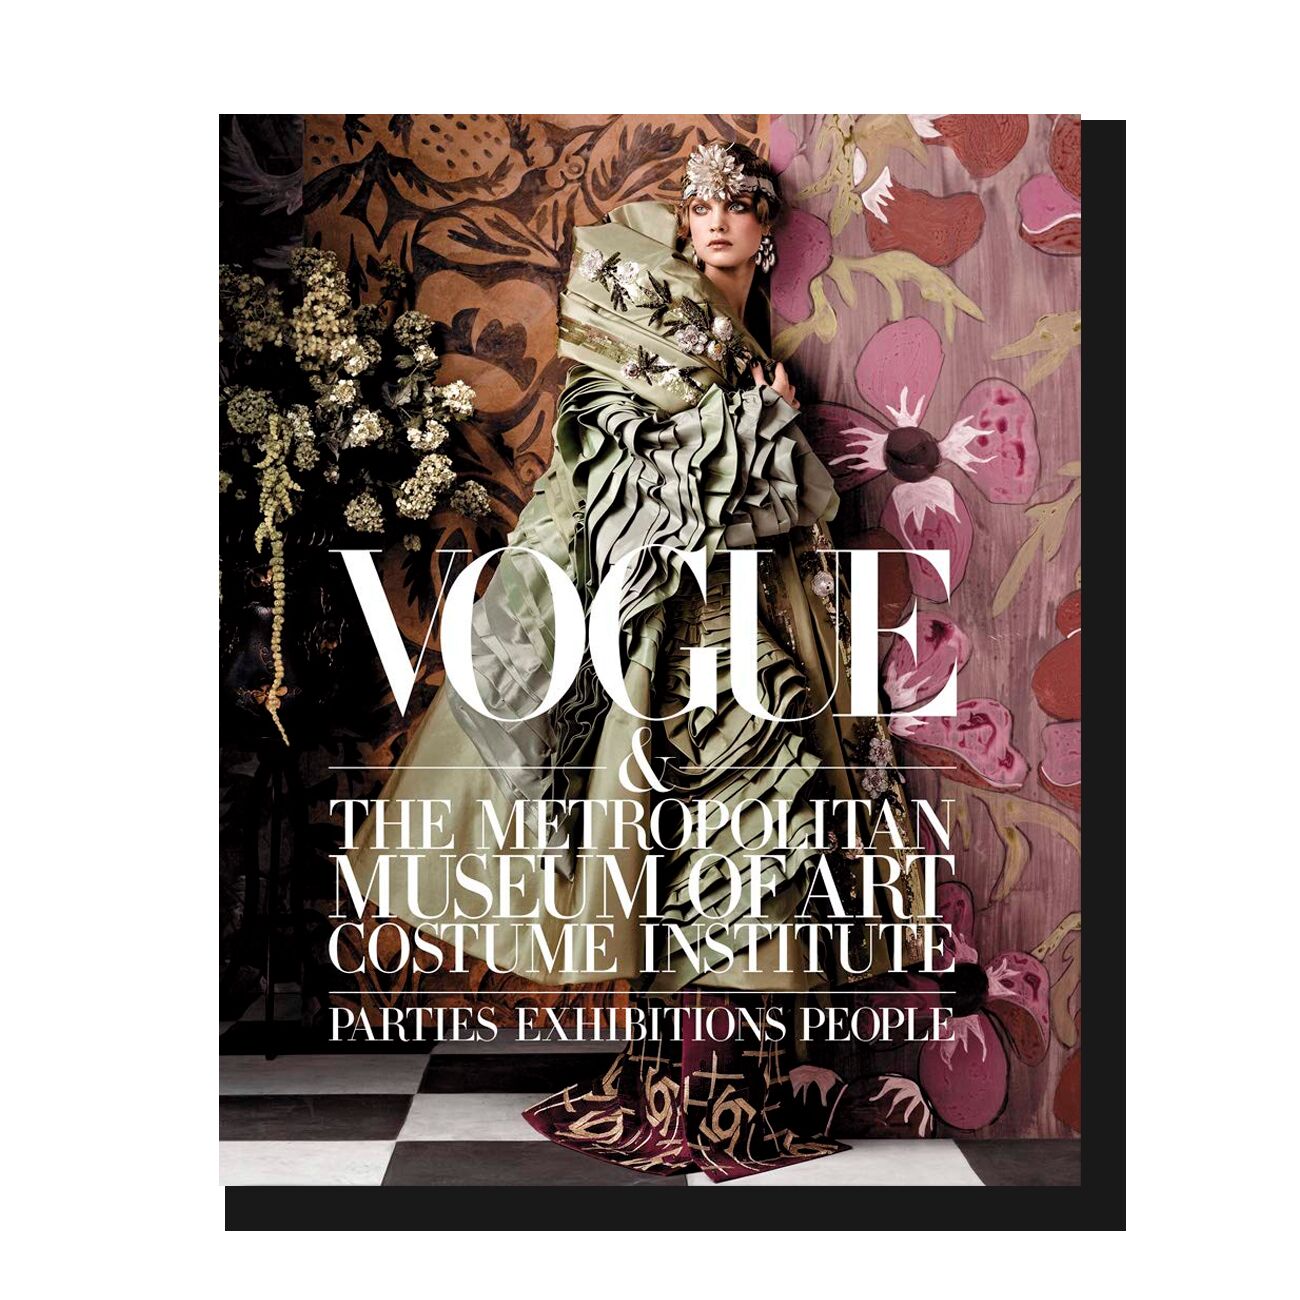 Vogue and The Metropolitan Museum of Art Costume Institute: Parties, Exhibitions, People